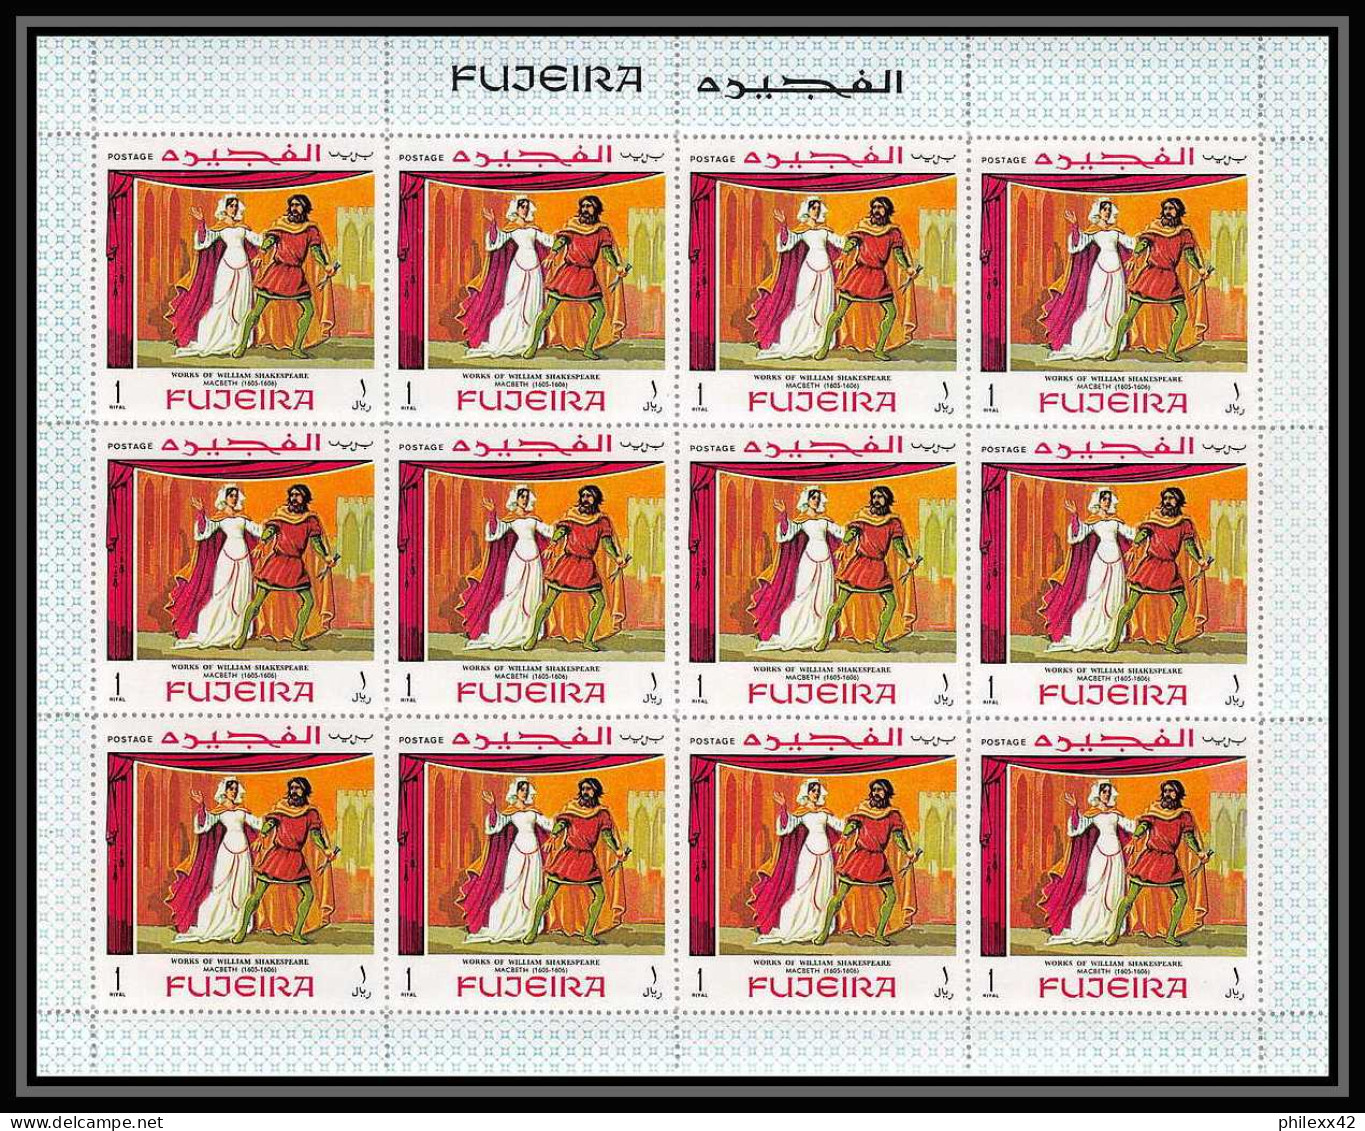 036a - Fujeira Mi N°311/319 A scenes from Shakespeare theatre feuille complete (sheet) MNH **